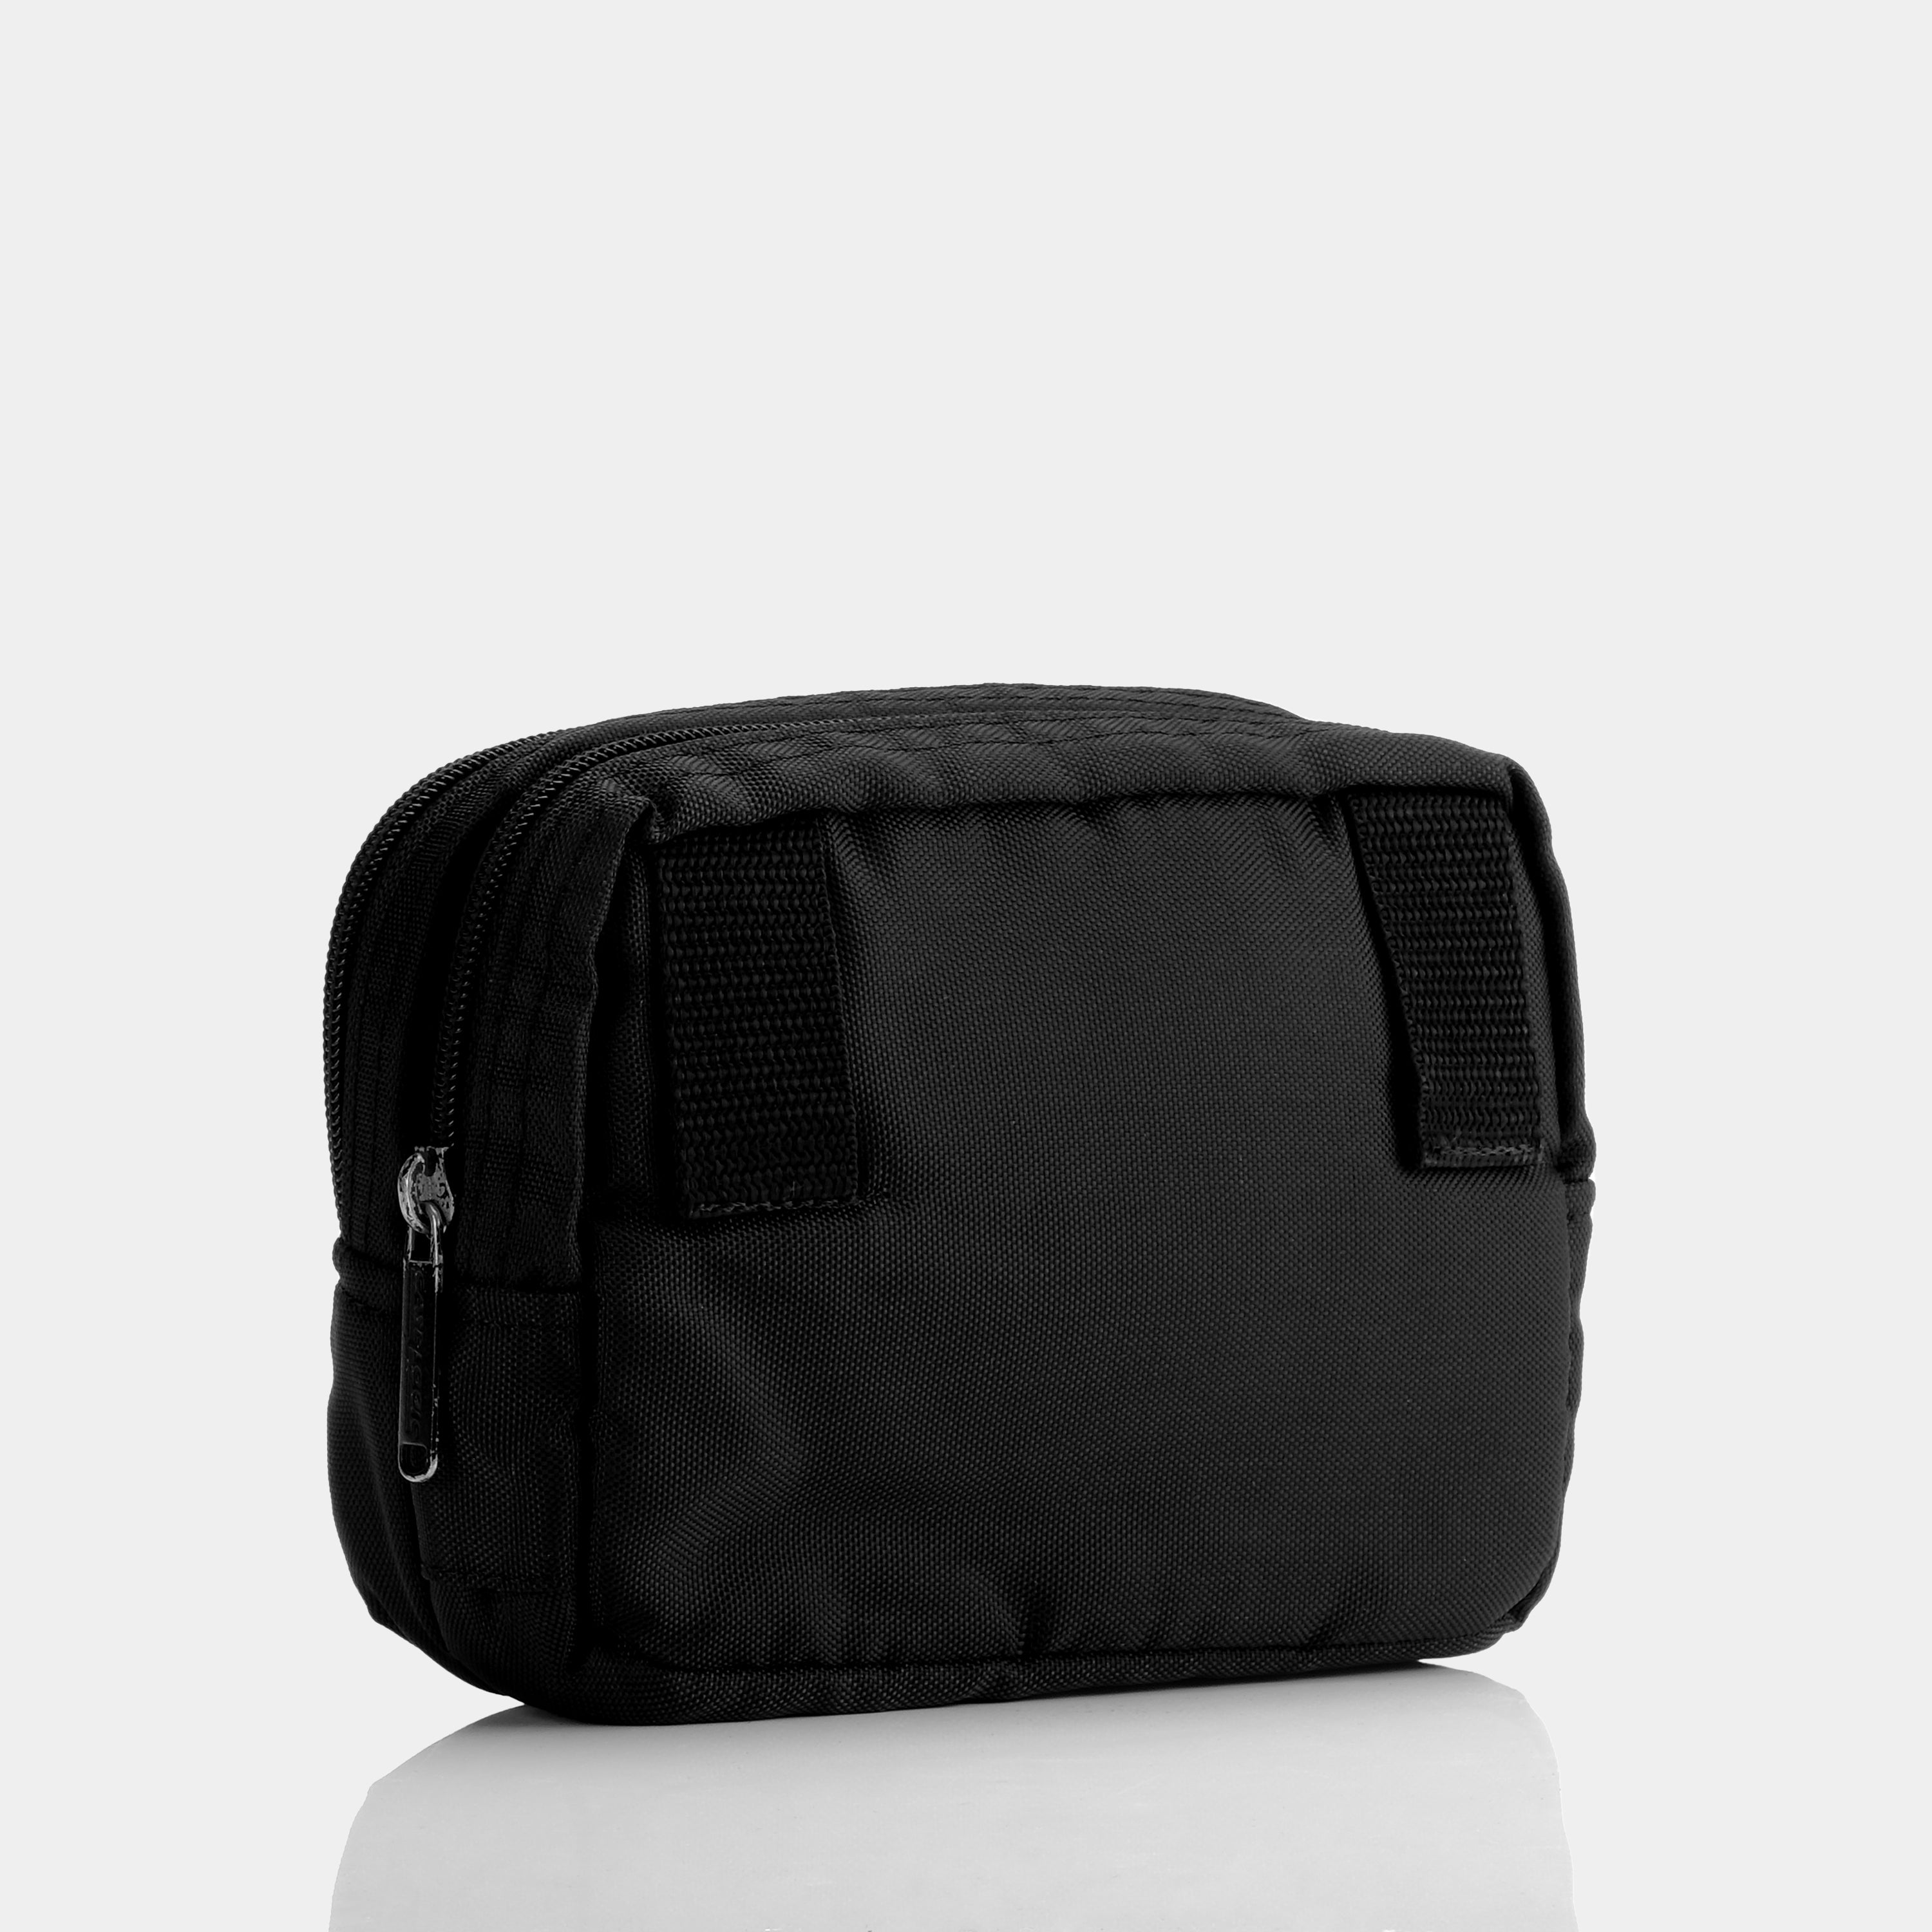 Case Logic Black Canvas Point And Shoot Camera Case